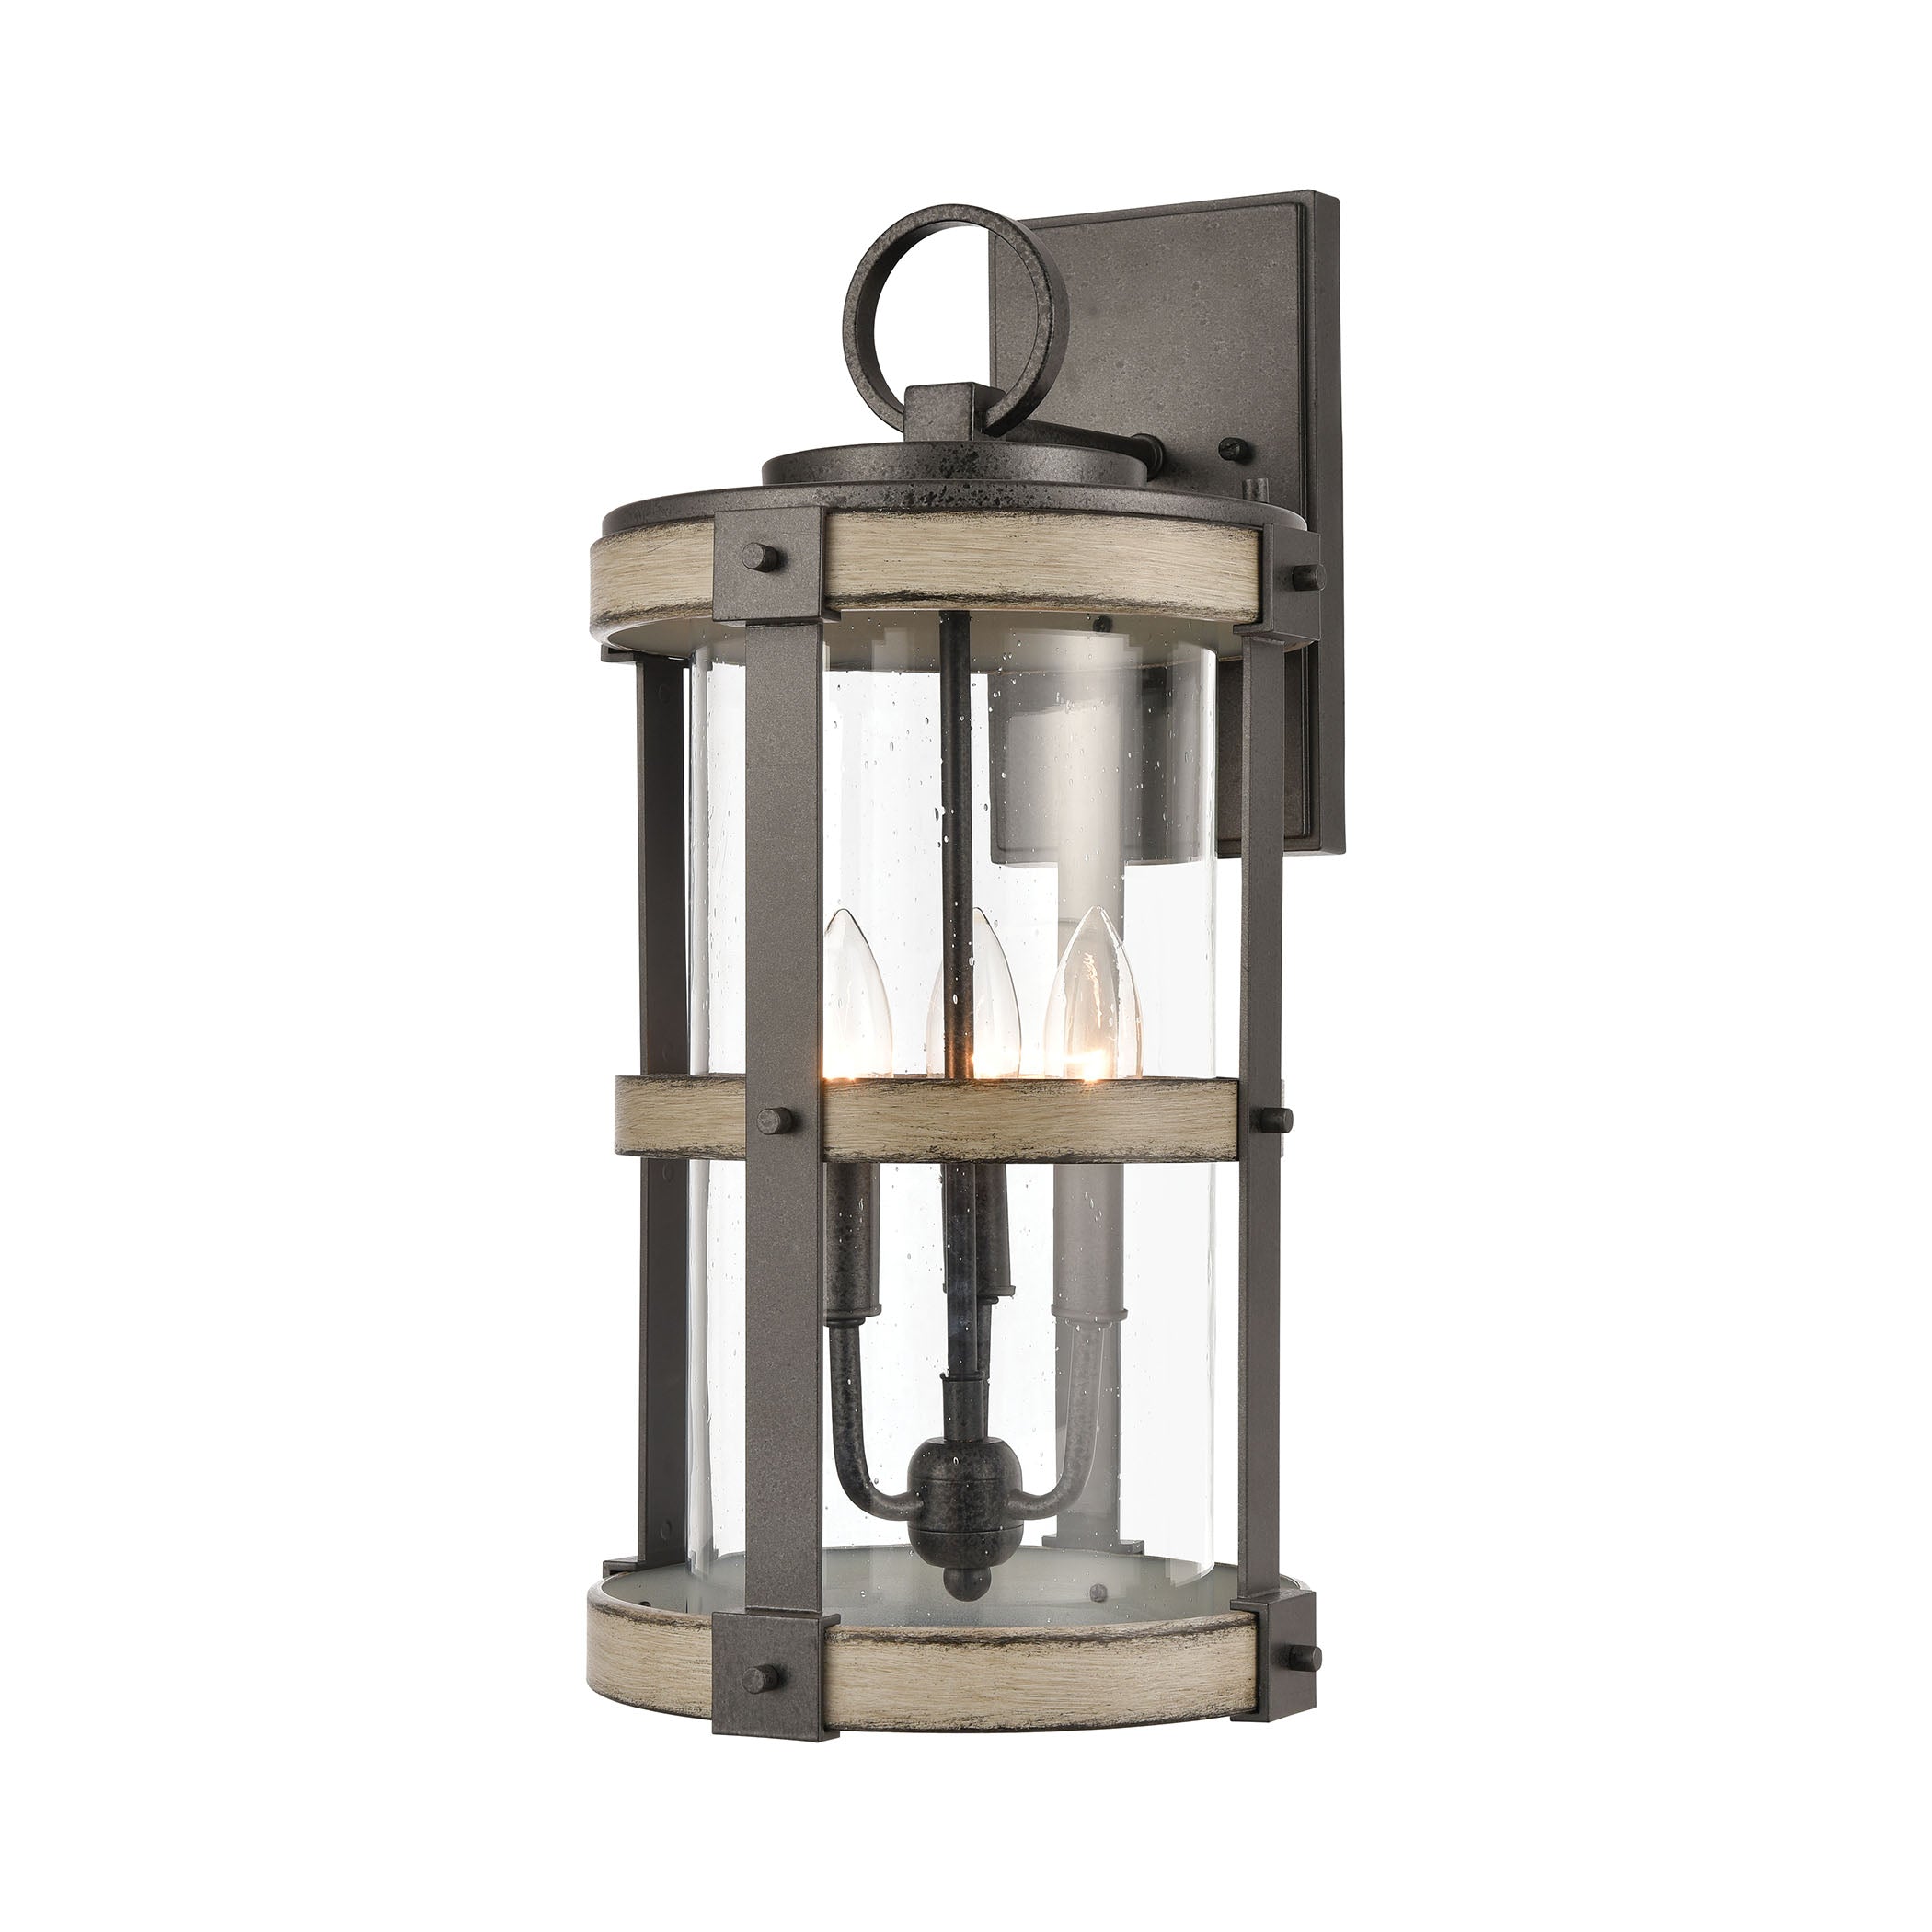 ELK Lighting 89146/3 Crenshaw 3-Light Outdoor Sconce in Anvil Iron and Distressed Antique Graywood with Seedy Glass